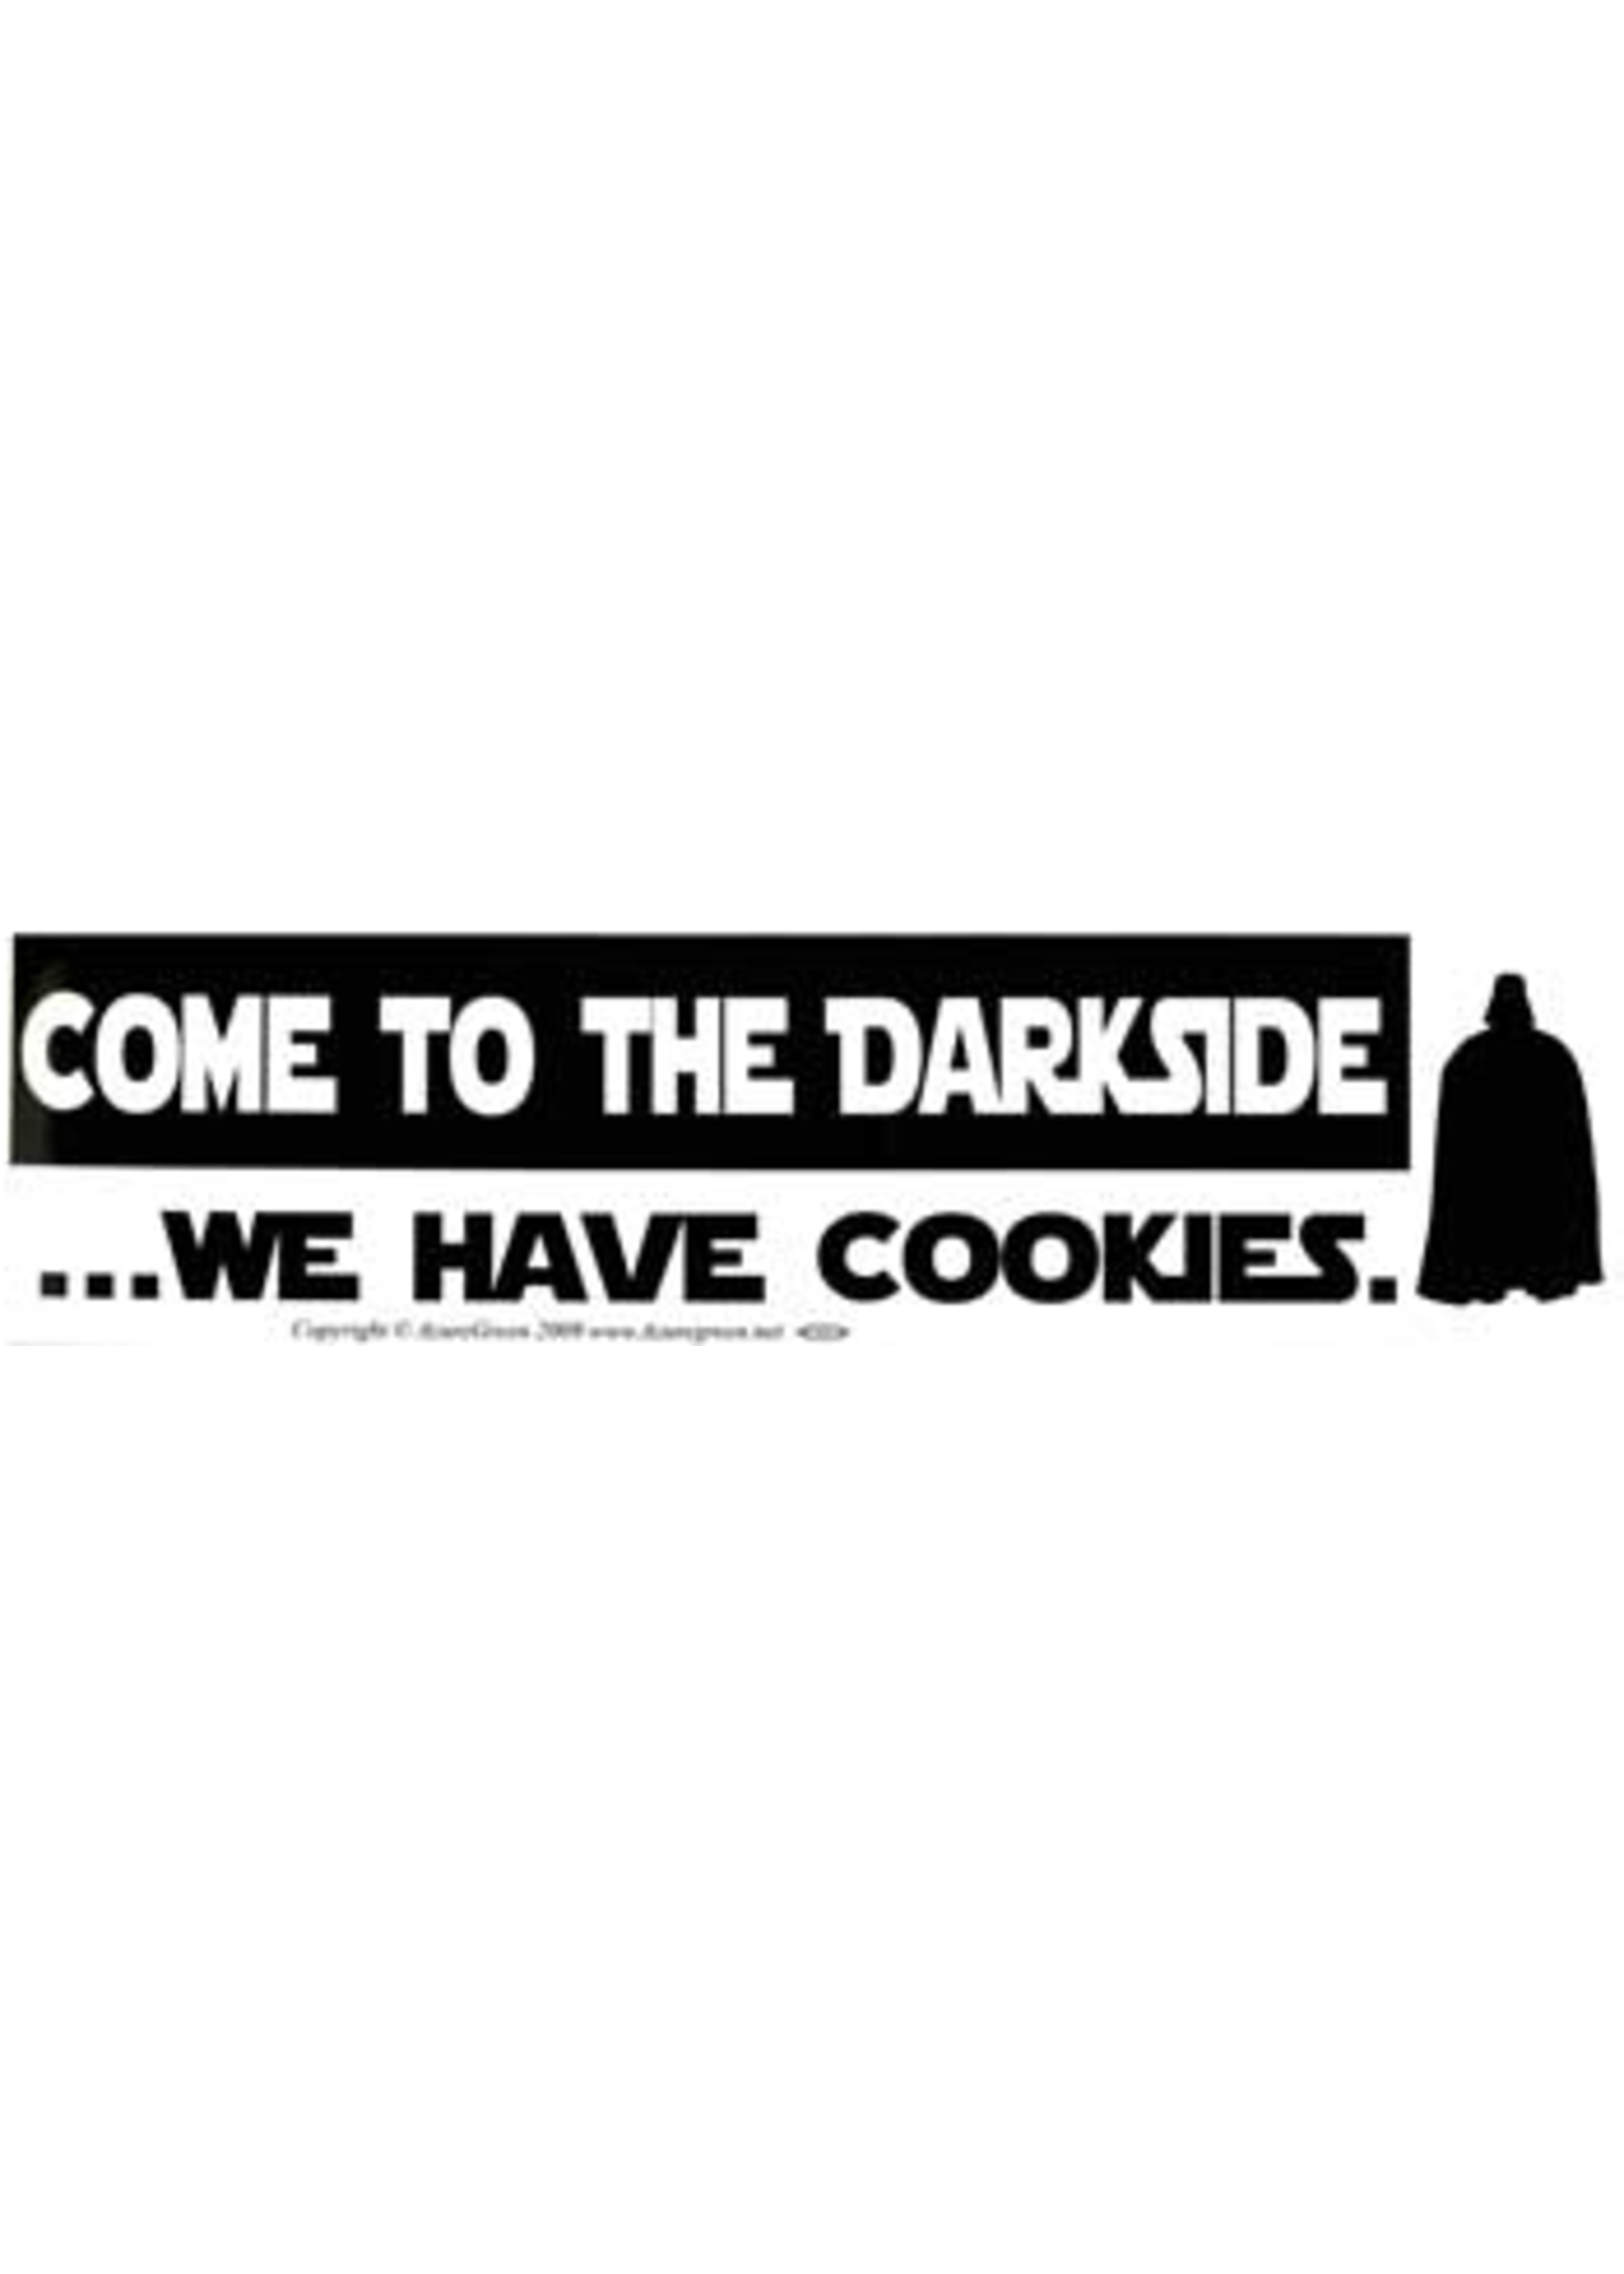 BUMP: Come to the Darkside We have cookies (126)